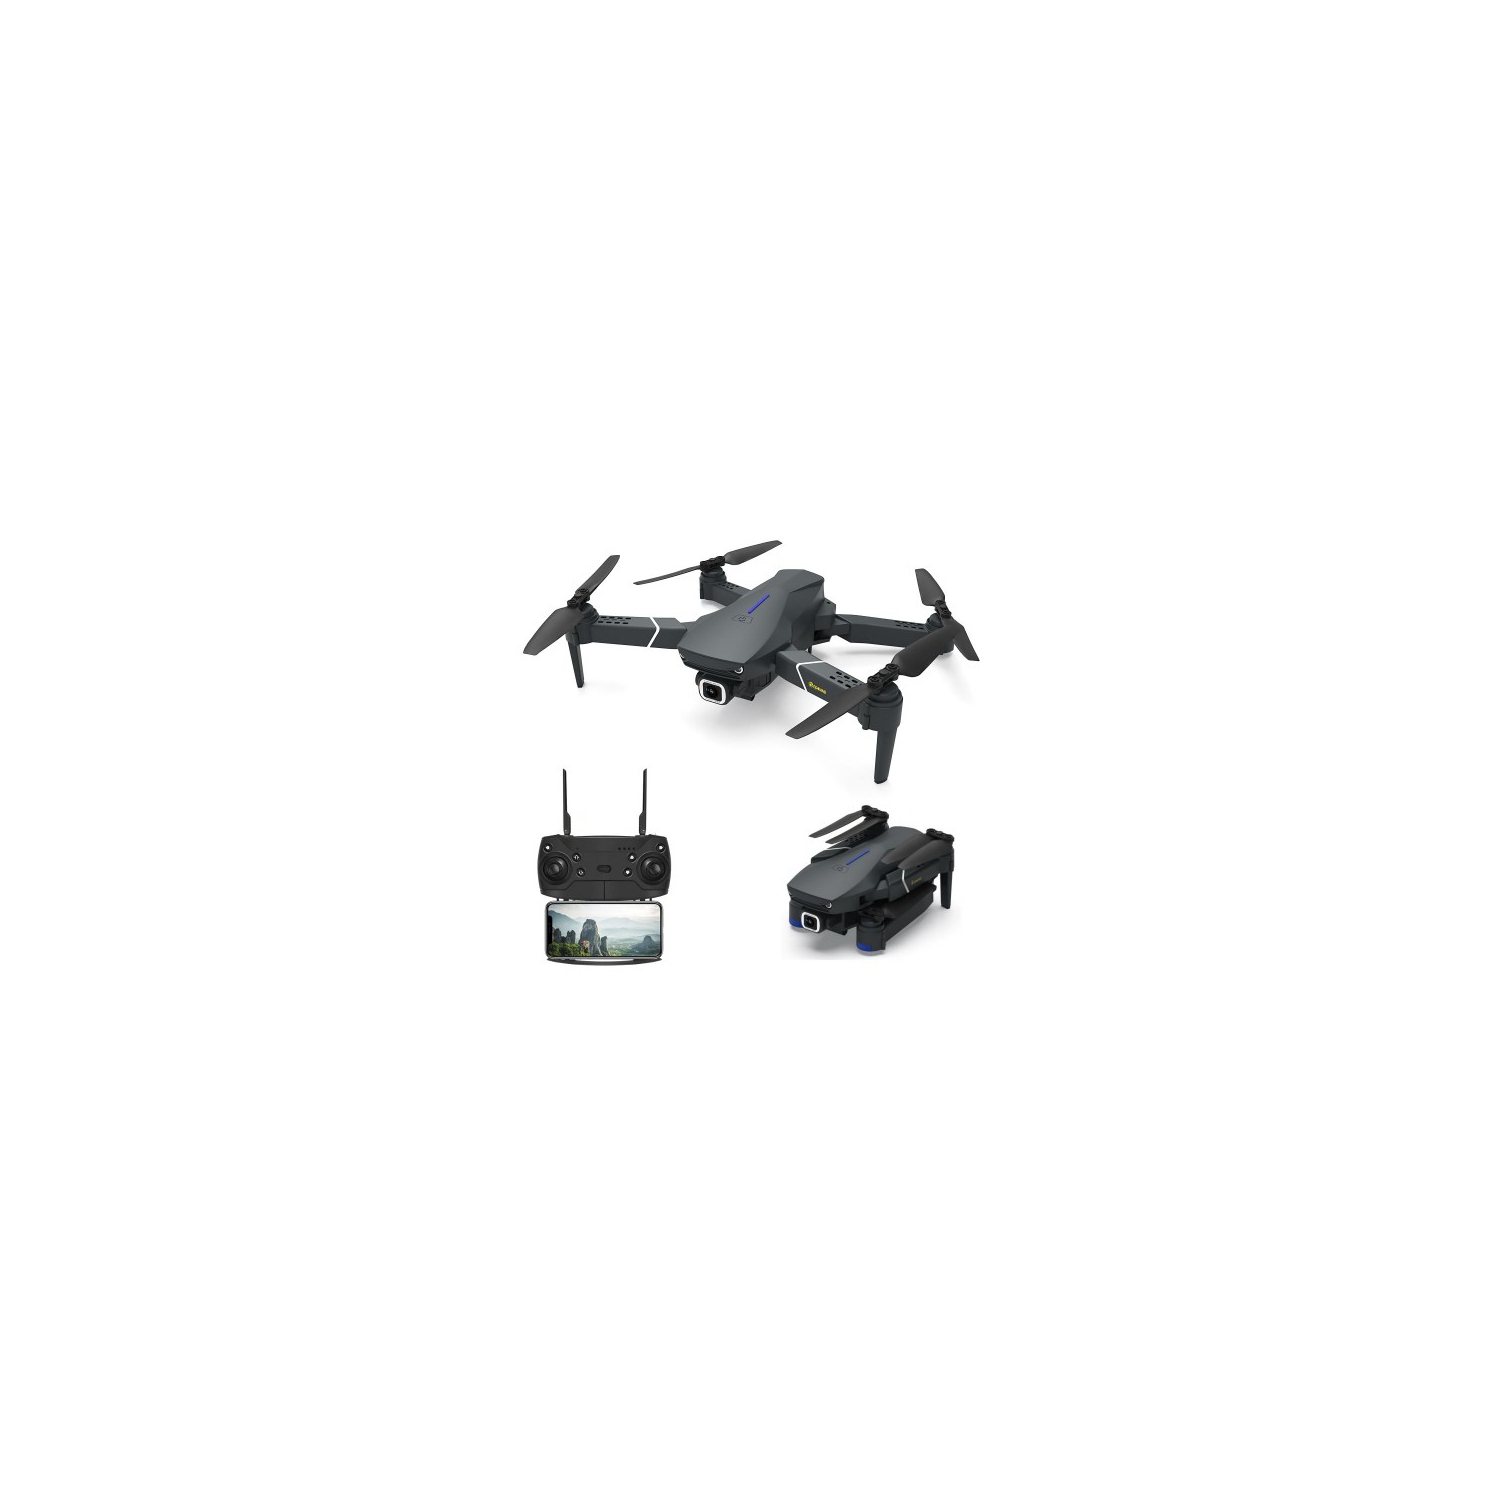 EACHINE Foldable RC Drone Quadcopter RTF with Wifi FPV, 4K HD, Wide Angle Camera, High Hold Mode - E520